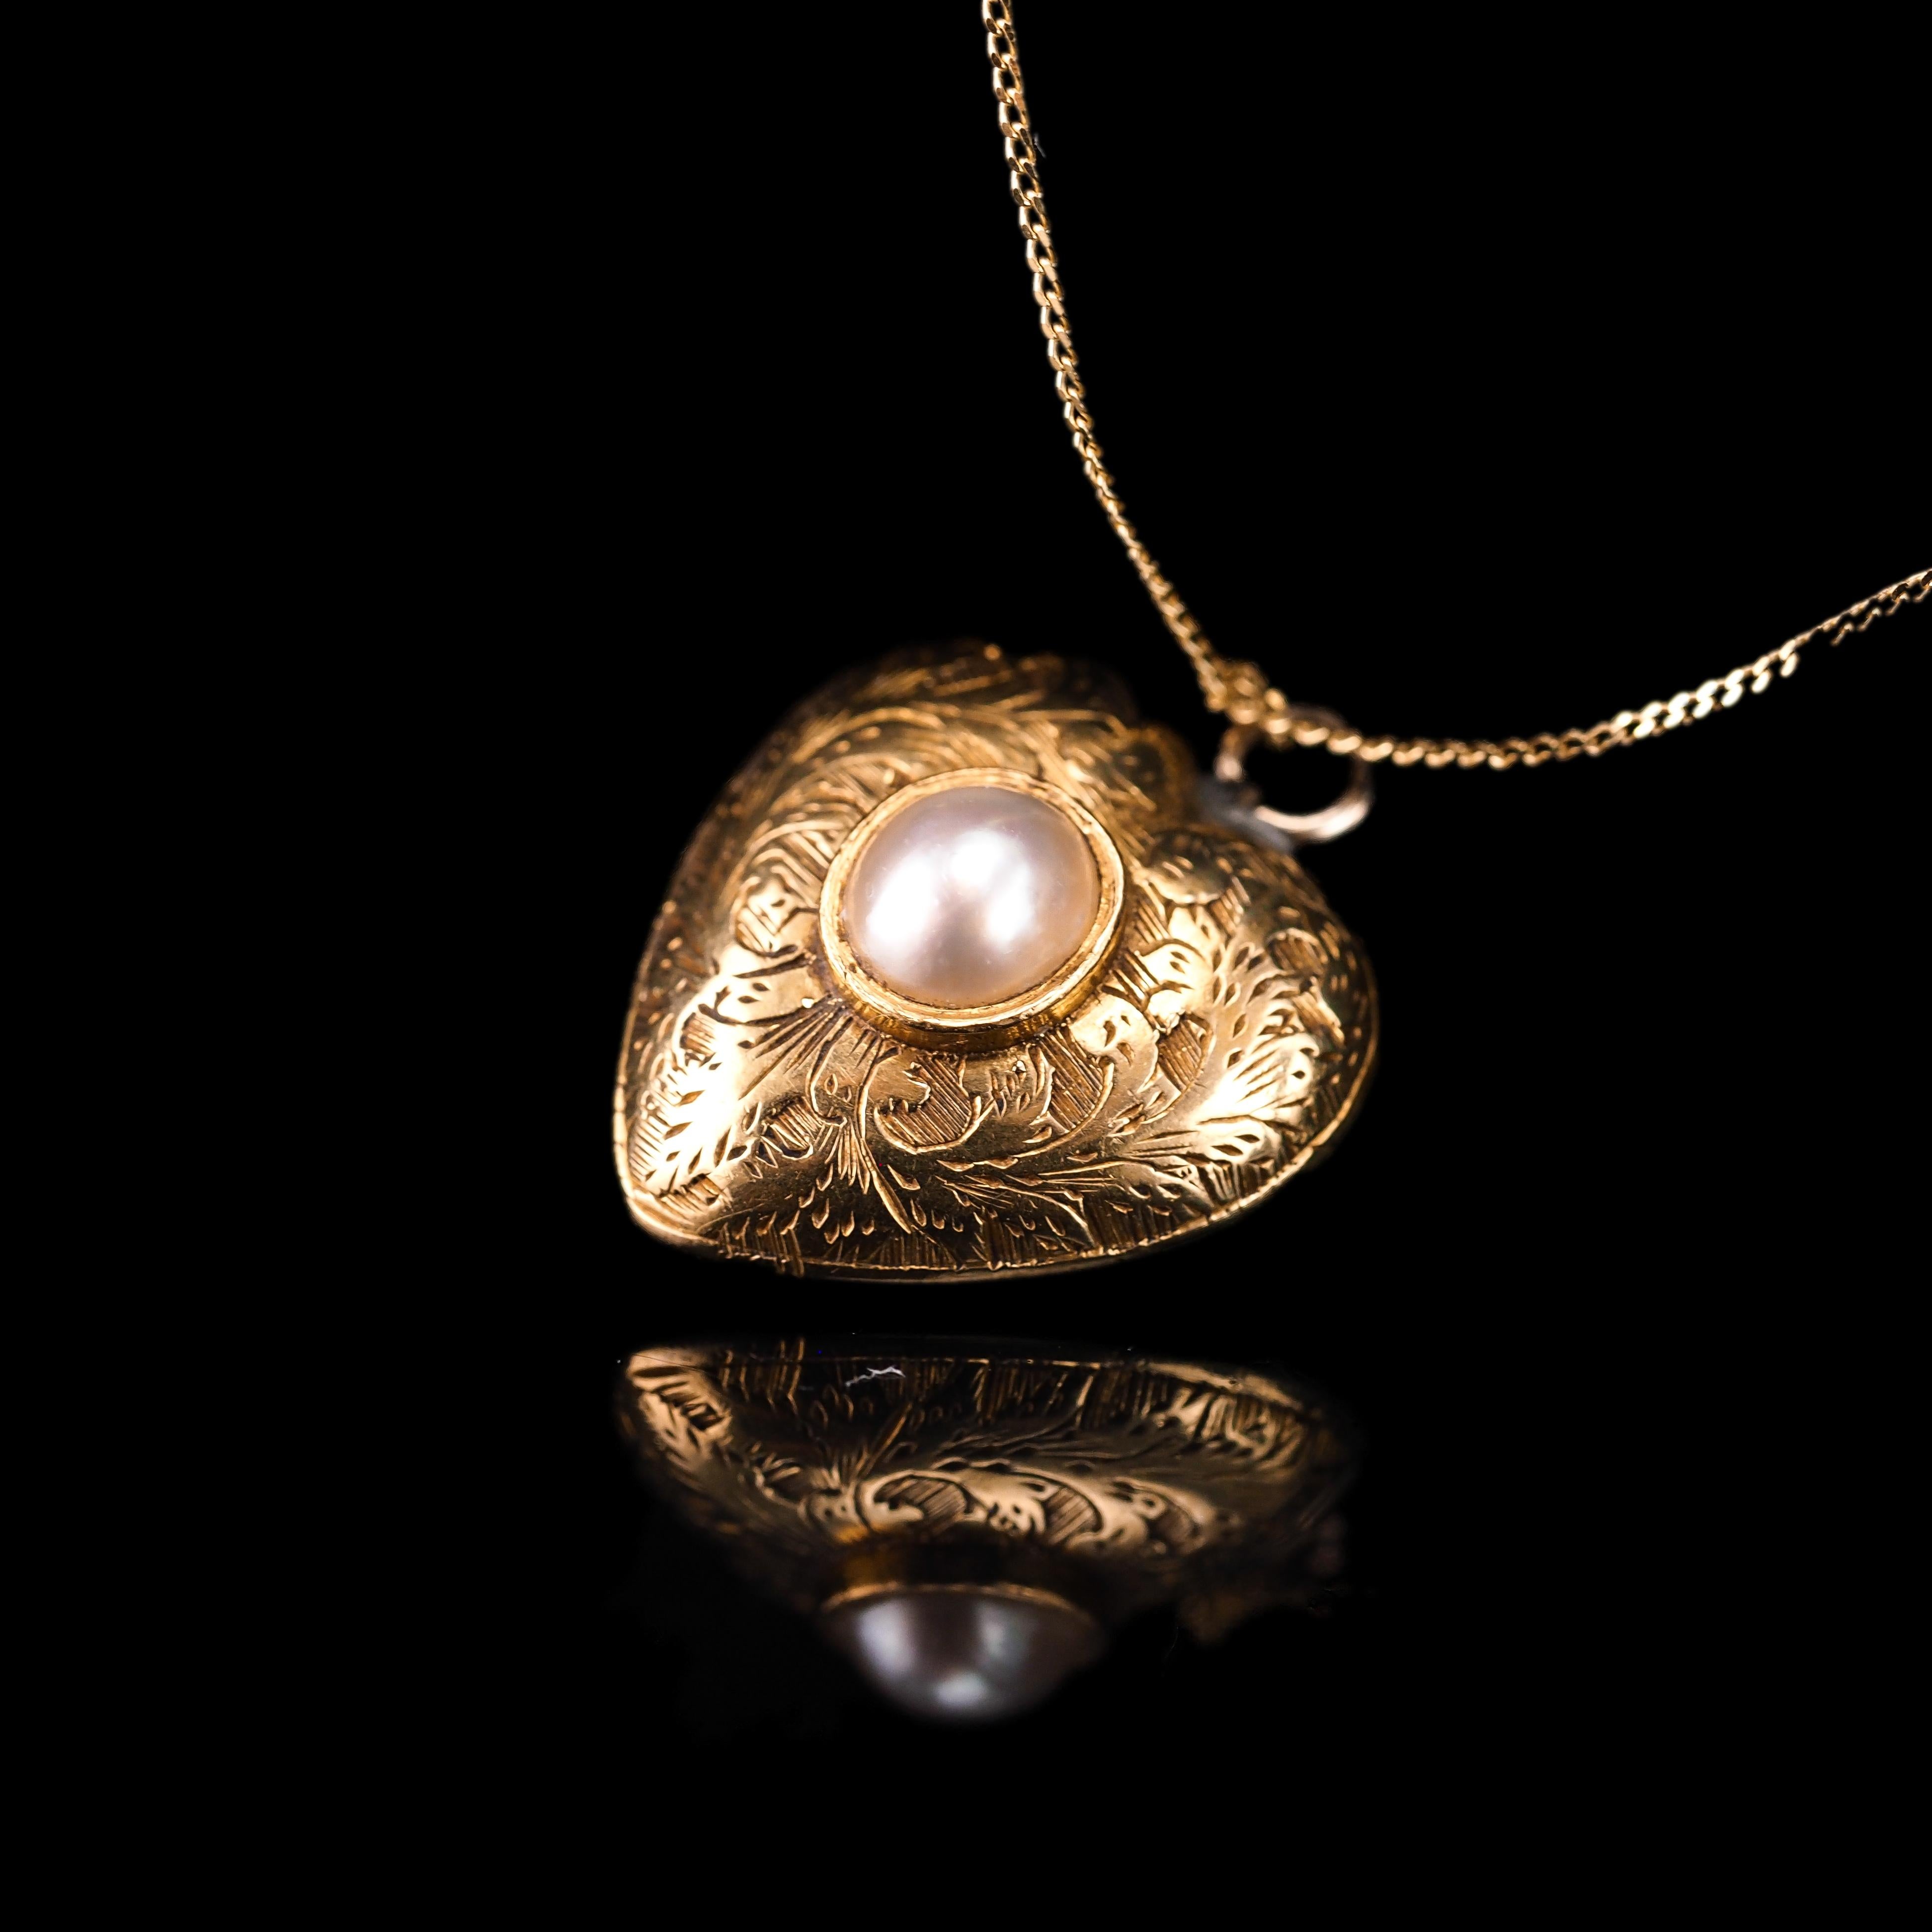 Antique 18K Gold Heart Charm Pendant Necklace with Pearl - Victorian c.1890 4